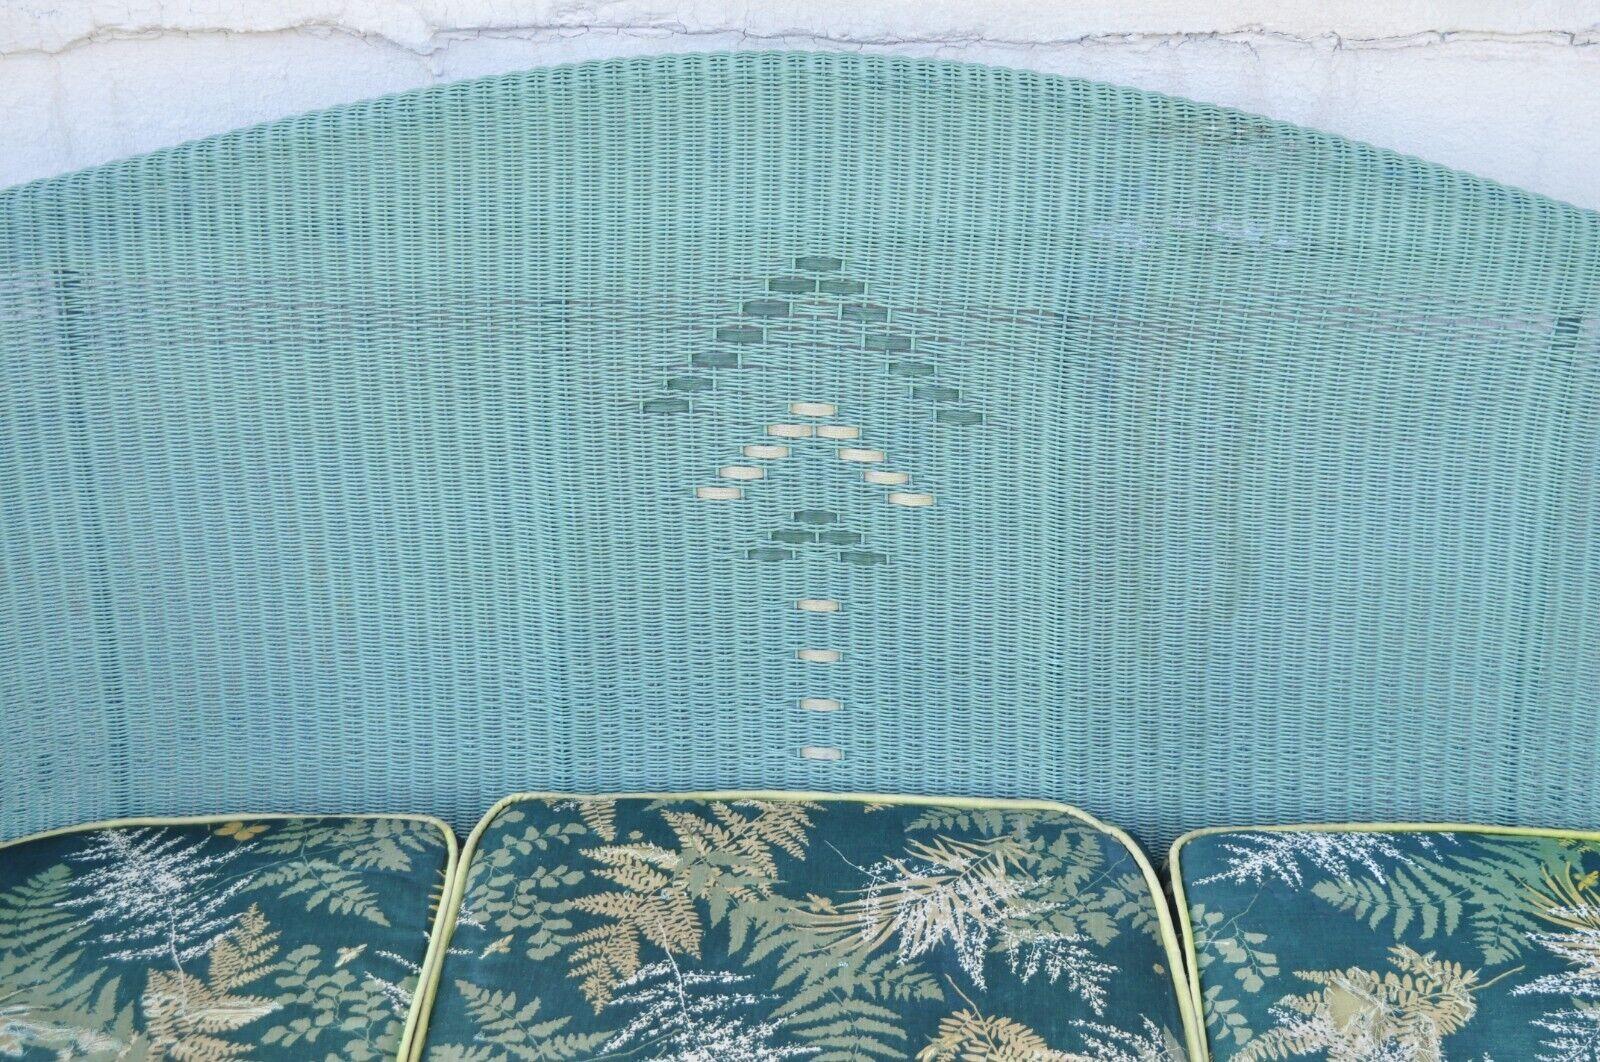 Victorian Blue Green Woven Wicker Sunroom Sofa Rocking Chair Lounge Chair 3 Pcs In Good Condition For Sale In Philadelphia, PA